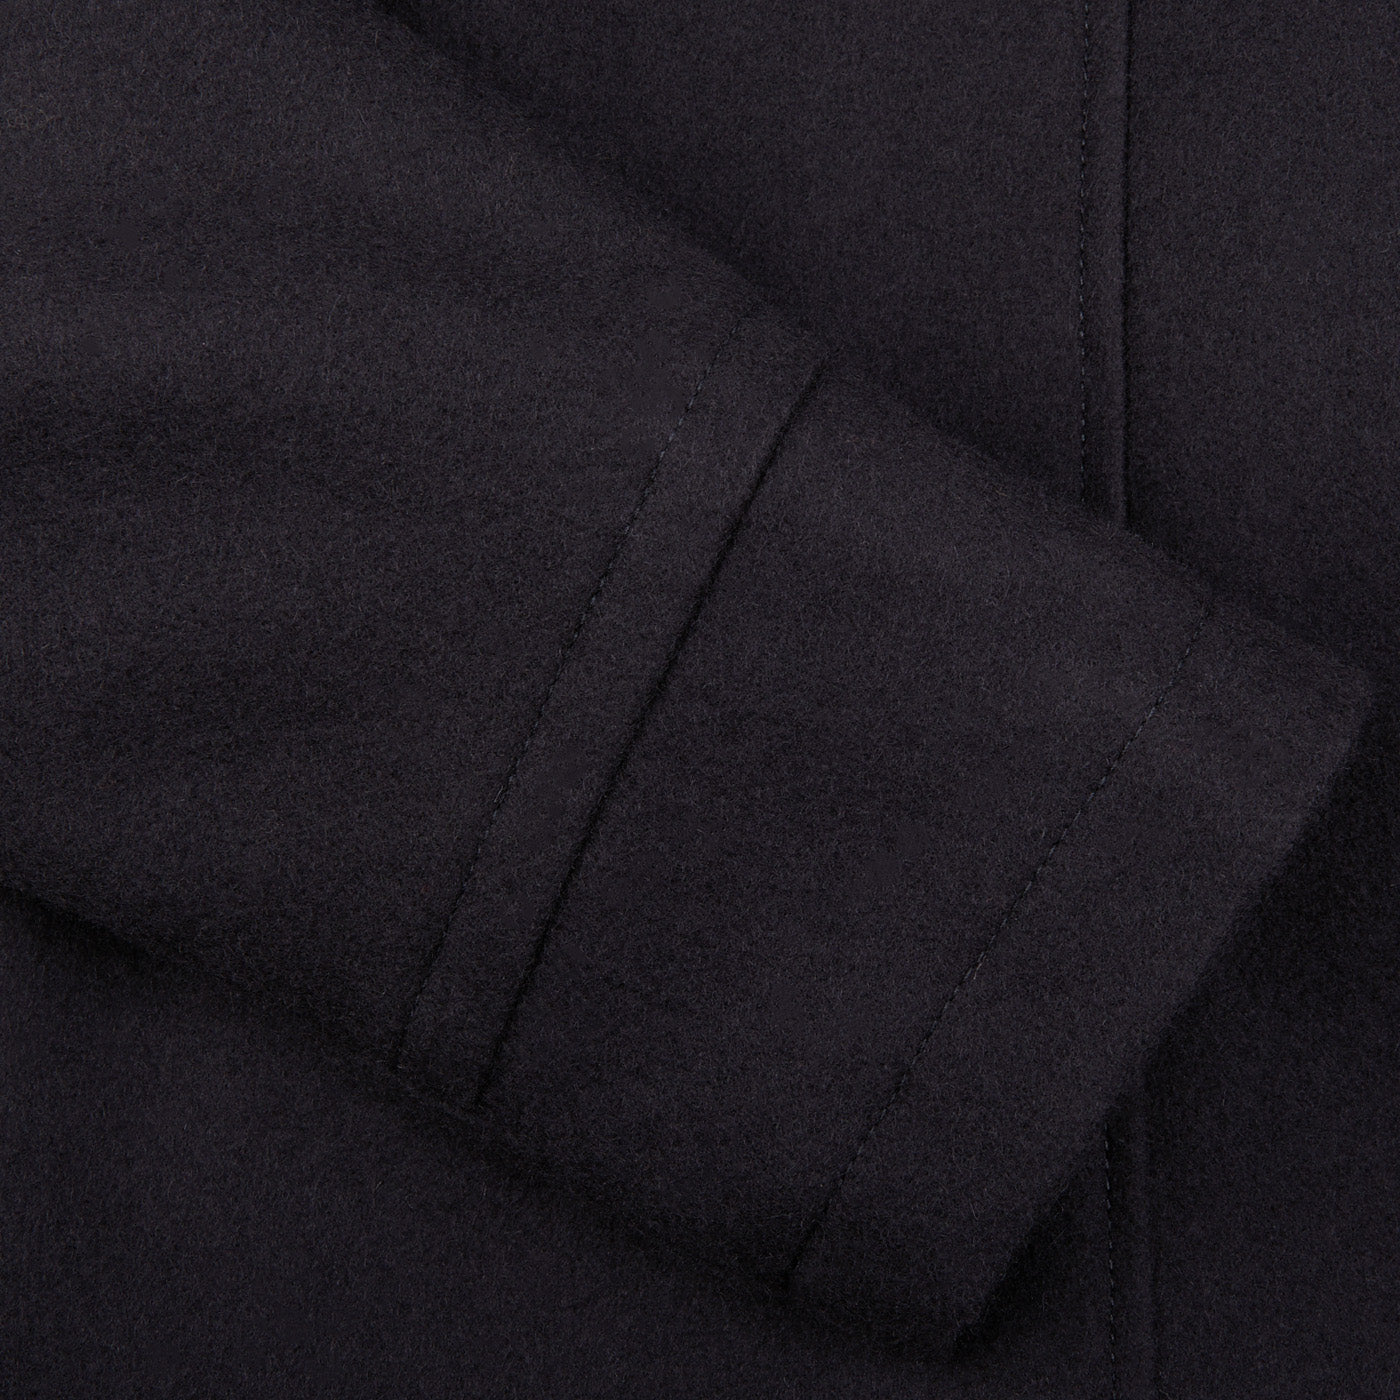 A close up of a Navy Blue Heavy Wool Casentino Peacoat by Manifattura Ceccarelli.